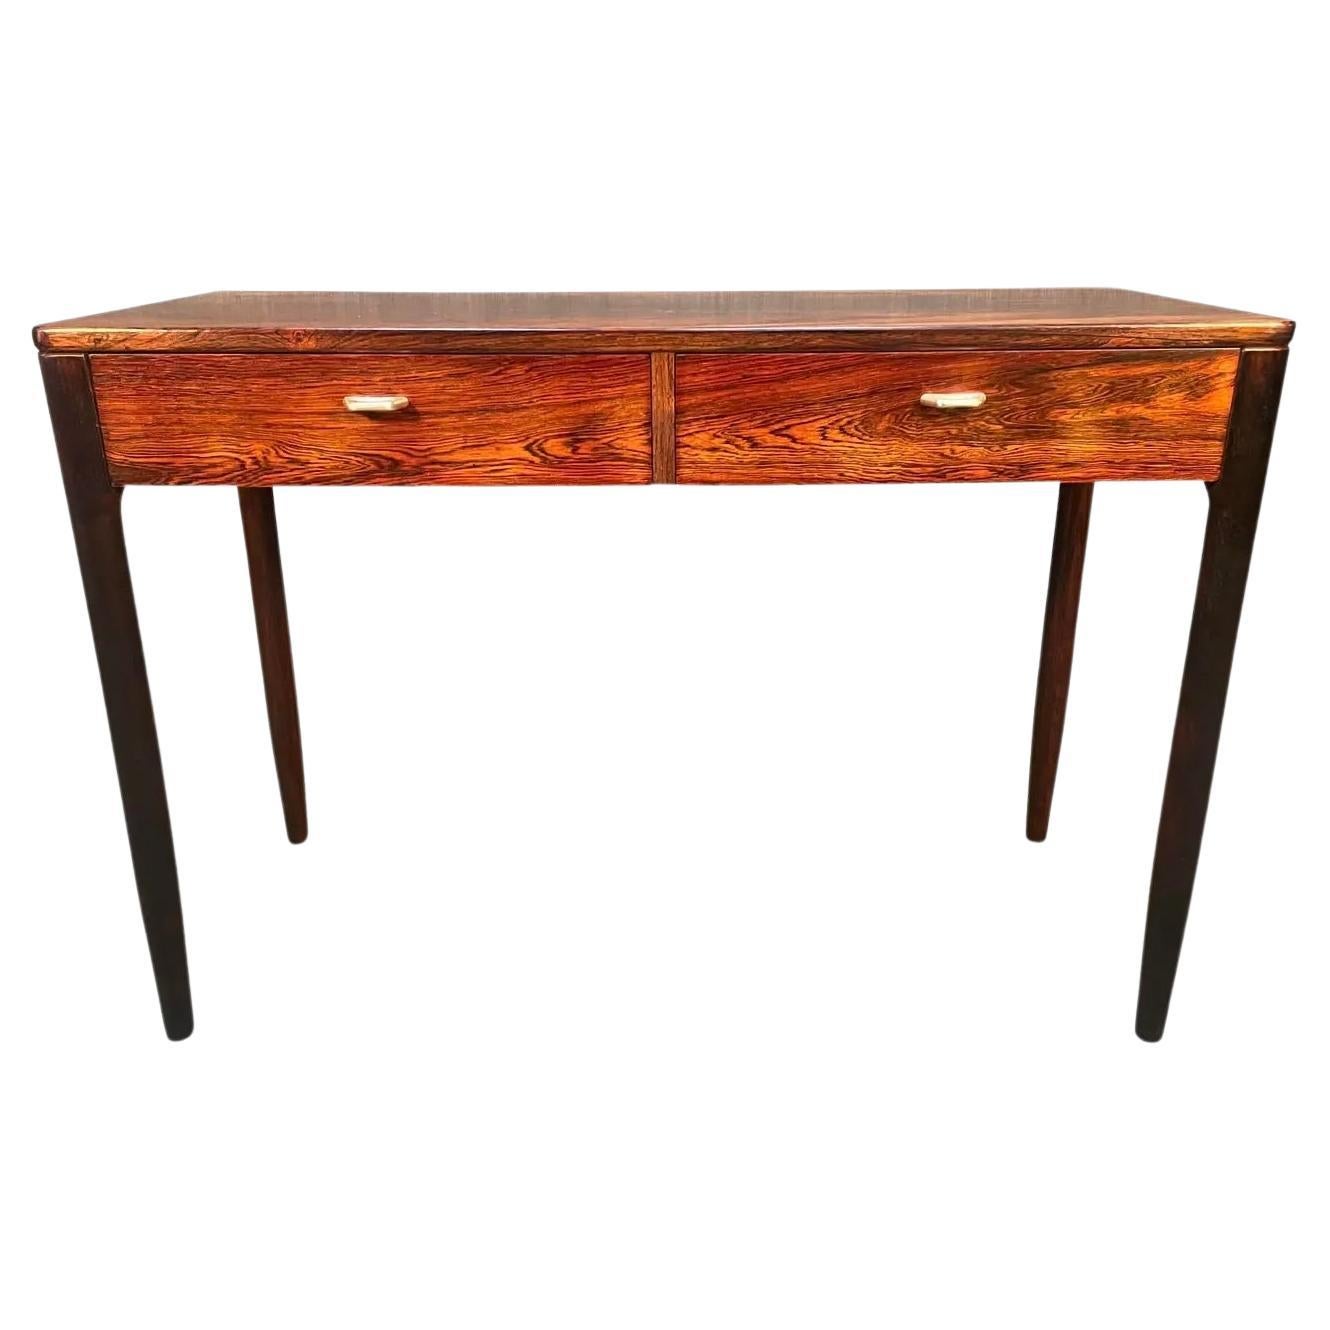 Vintage Danish Mid-Century Modern Rosewood Entry Way Console Table